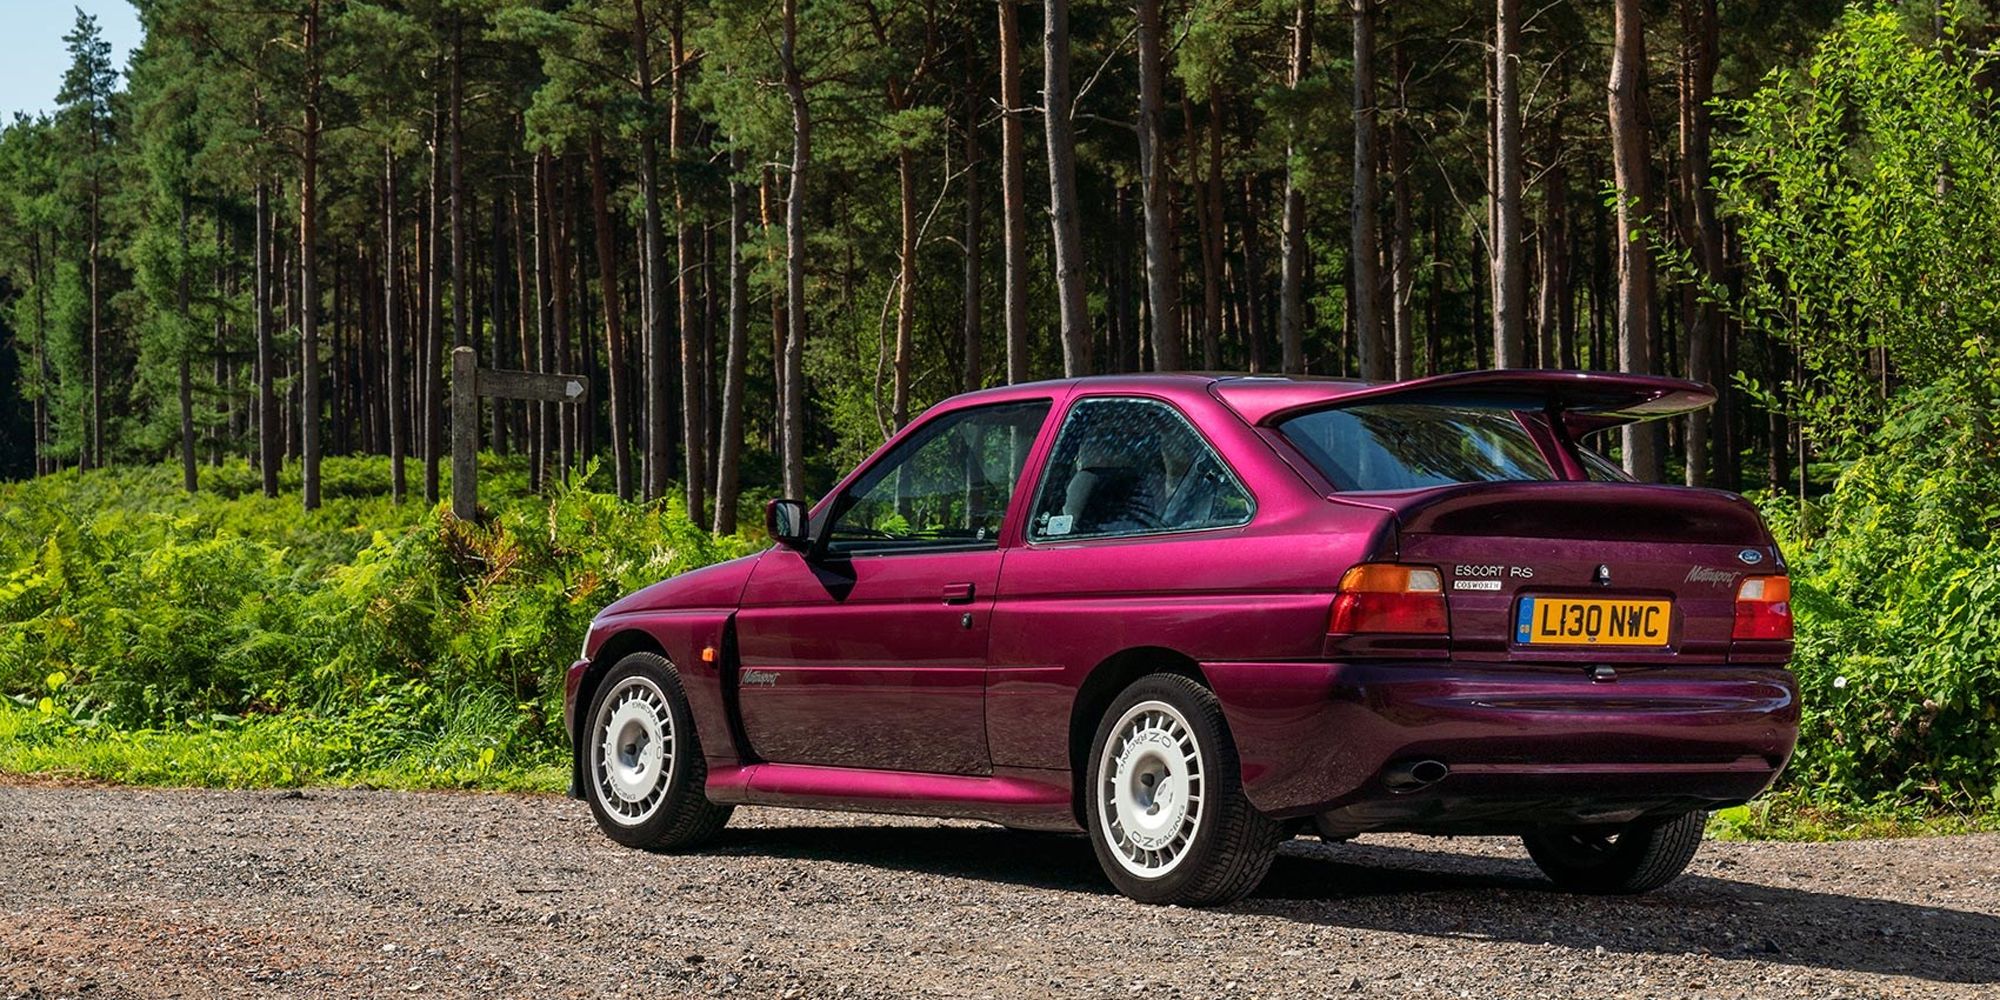 A purple RS Cosworth